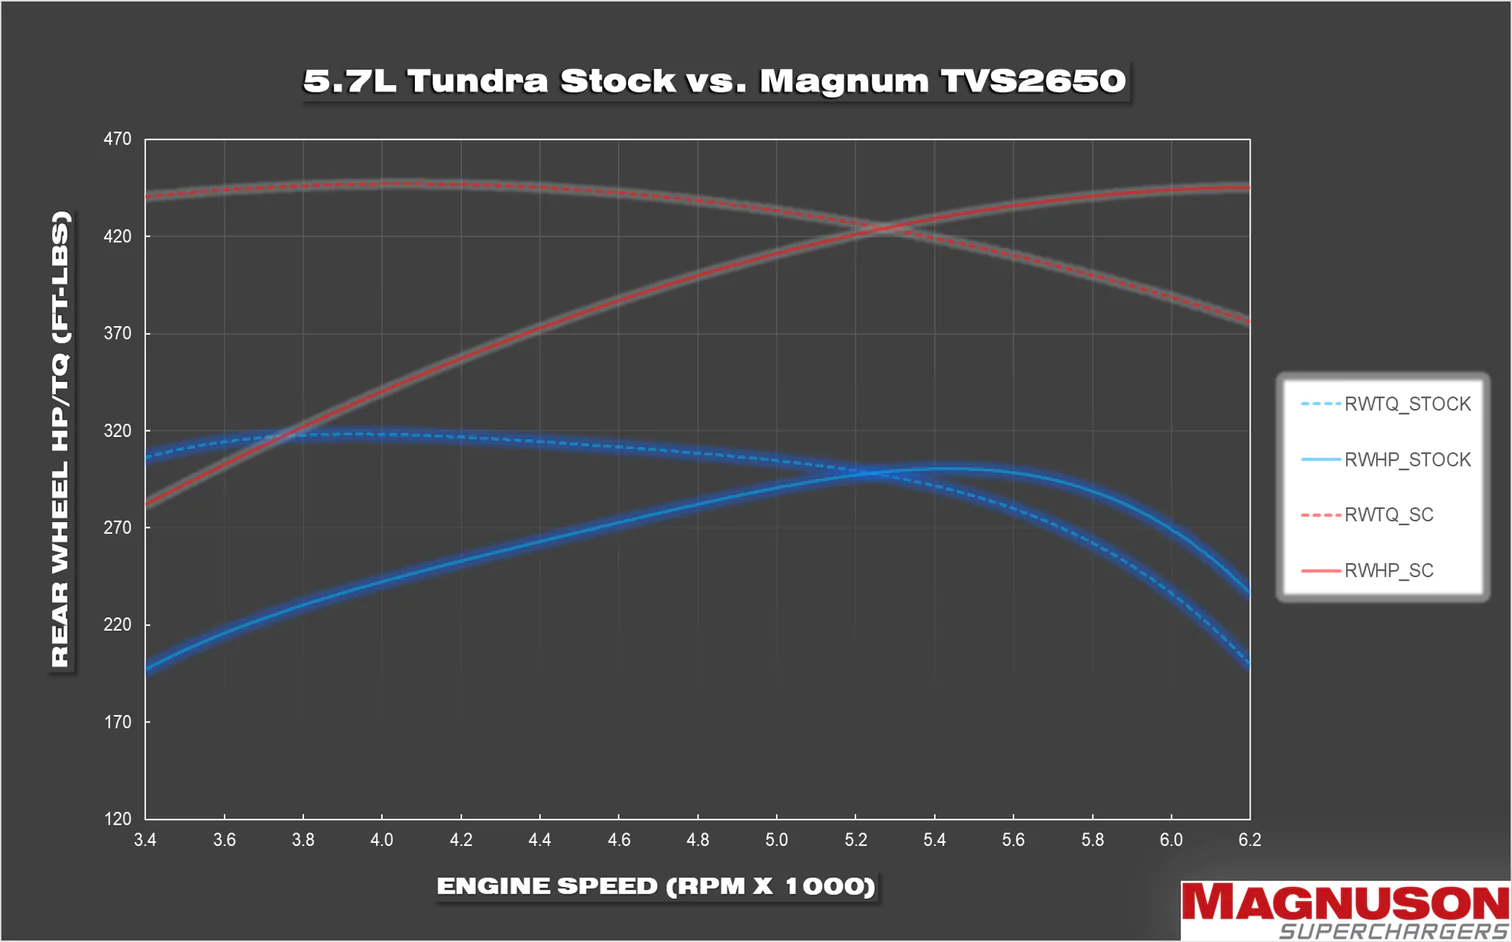 '07-18 Toyota Tundra Supercharger System Magnuson Superchargers (stock v Magnuson engine speed chart)